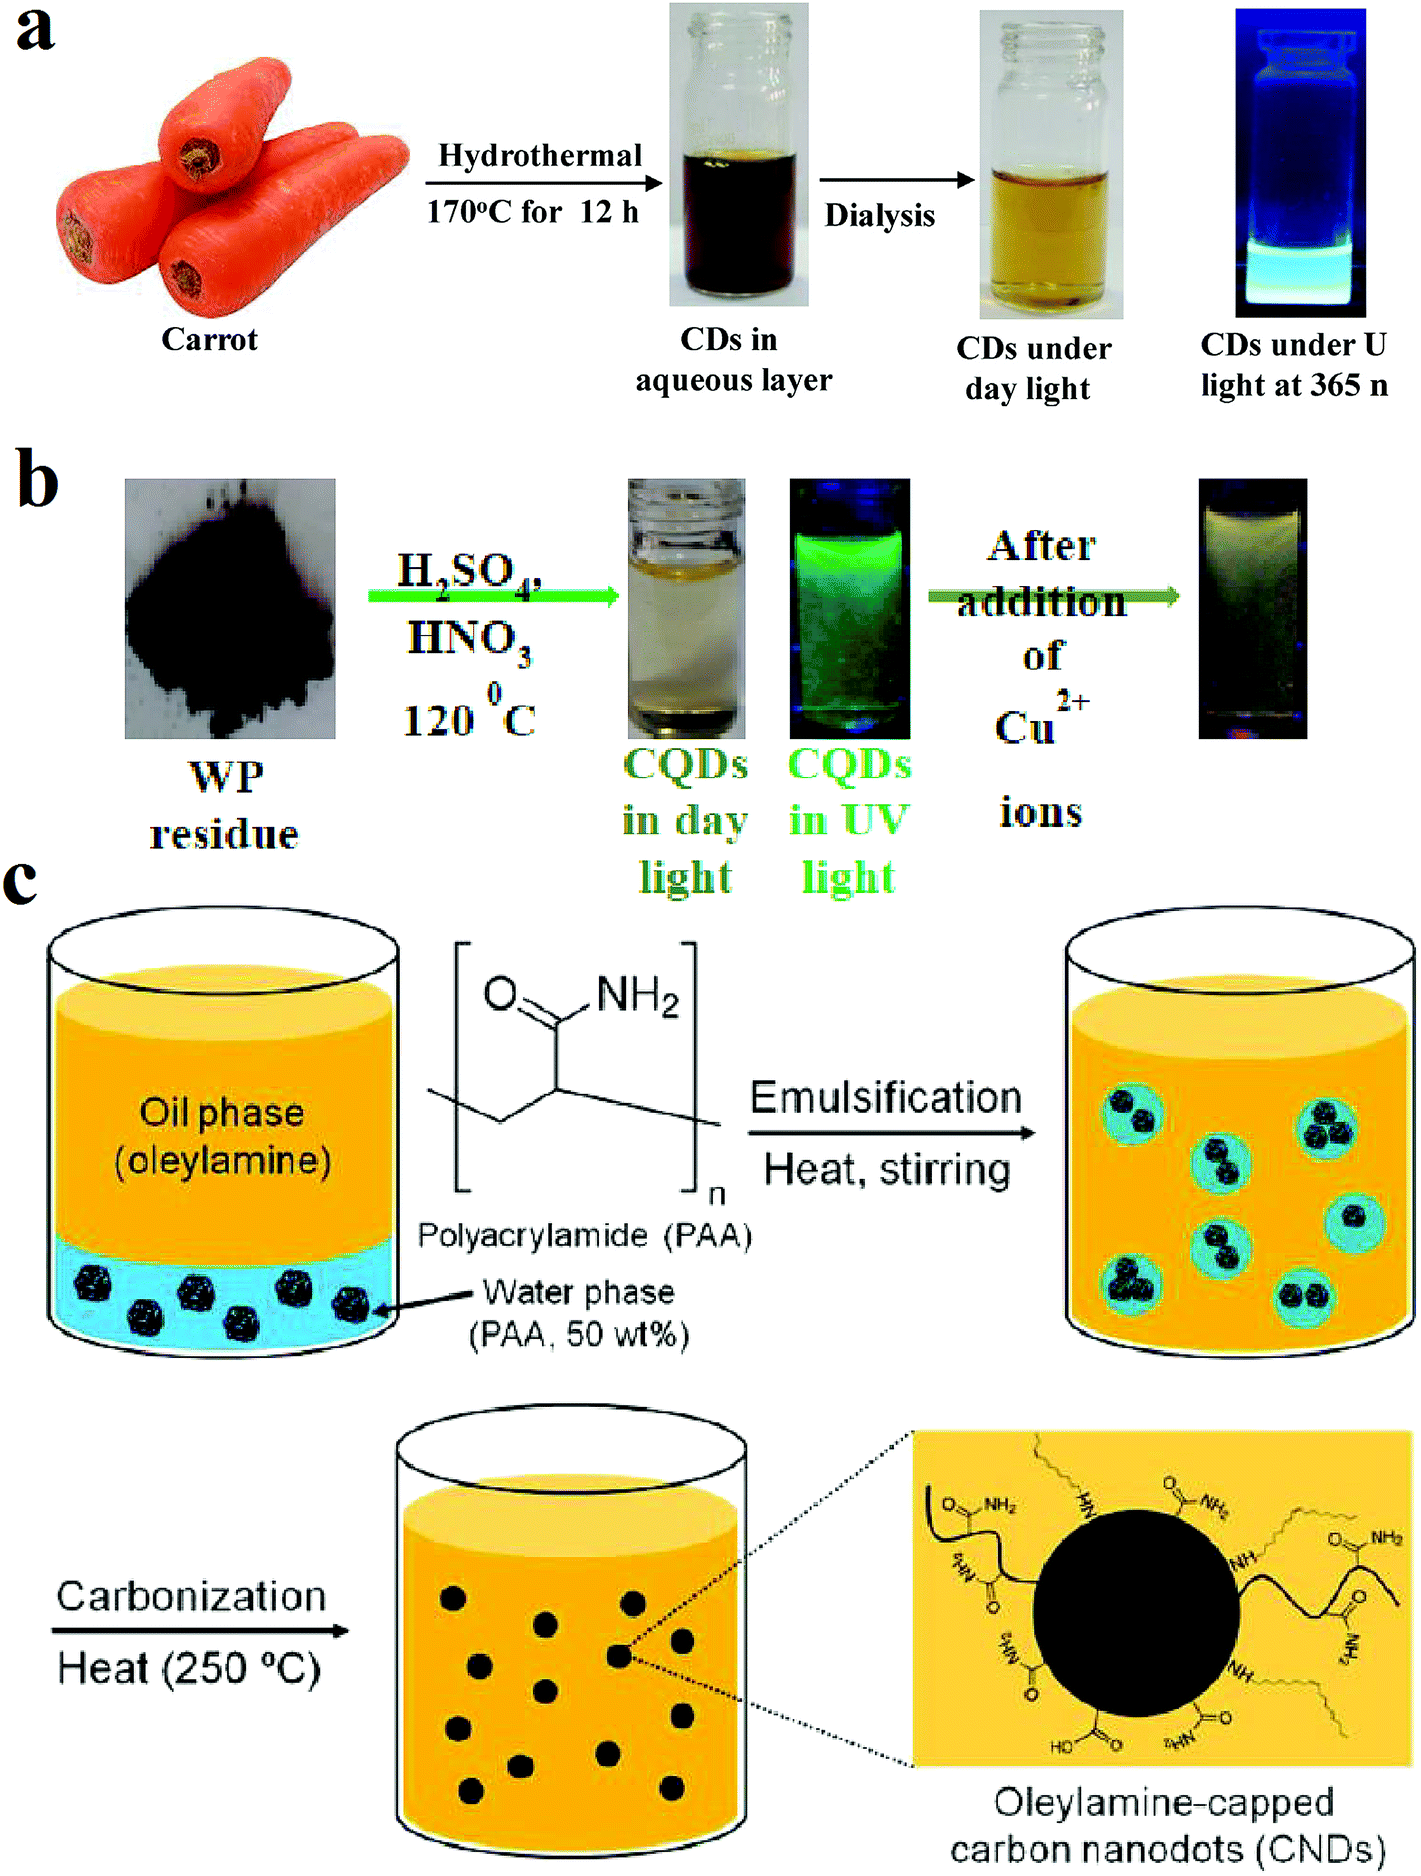 Carbon quantum dots and their biomedical and therapeutic applications: a  review - RSC Advances (RSC Publishing) DOI:10.1039/C8RA08088G